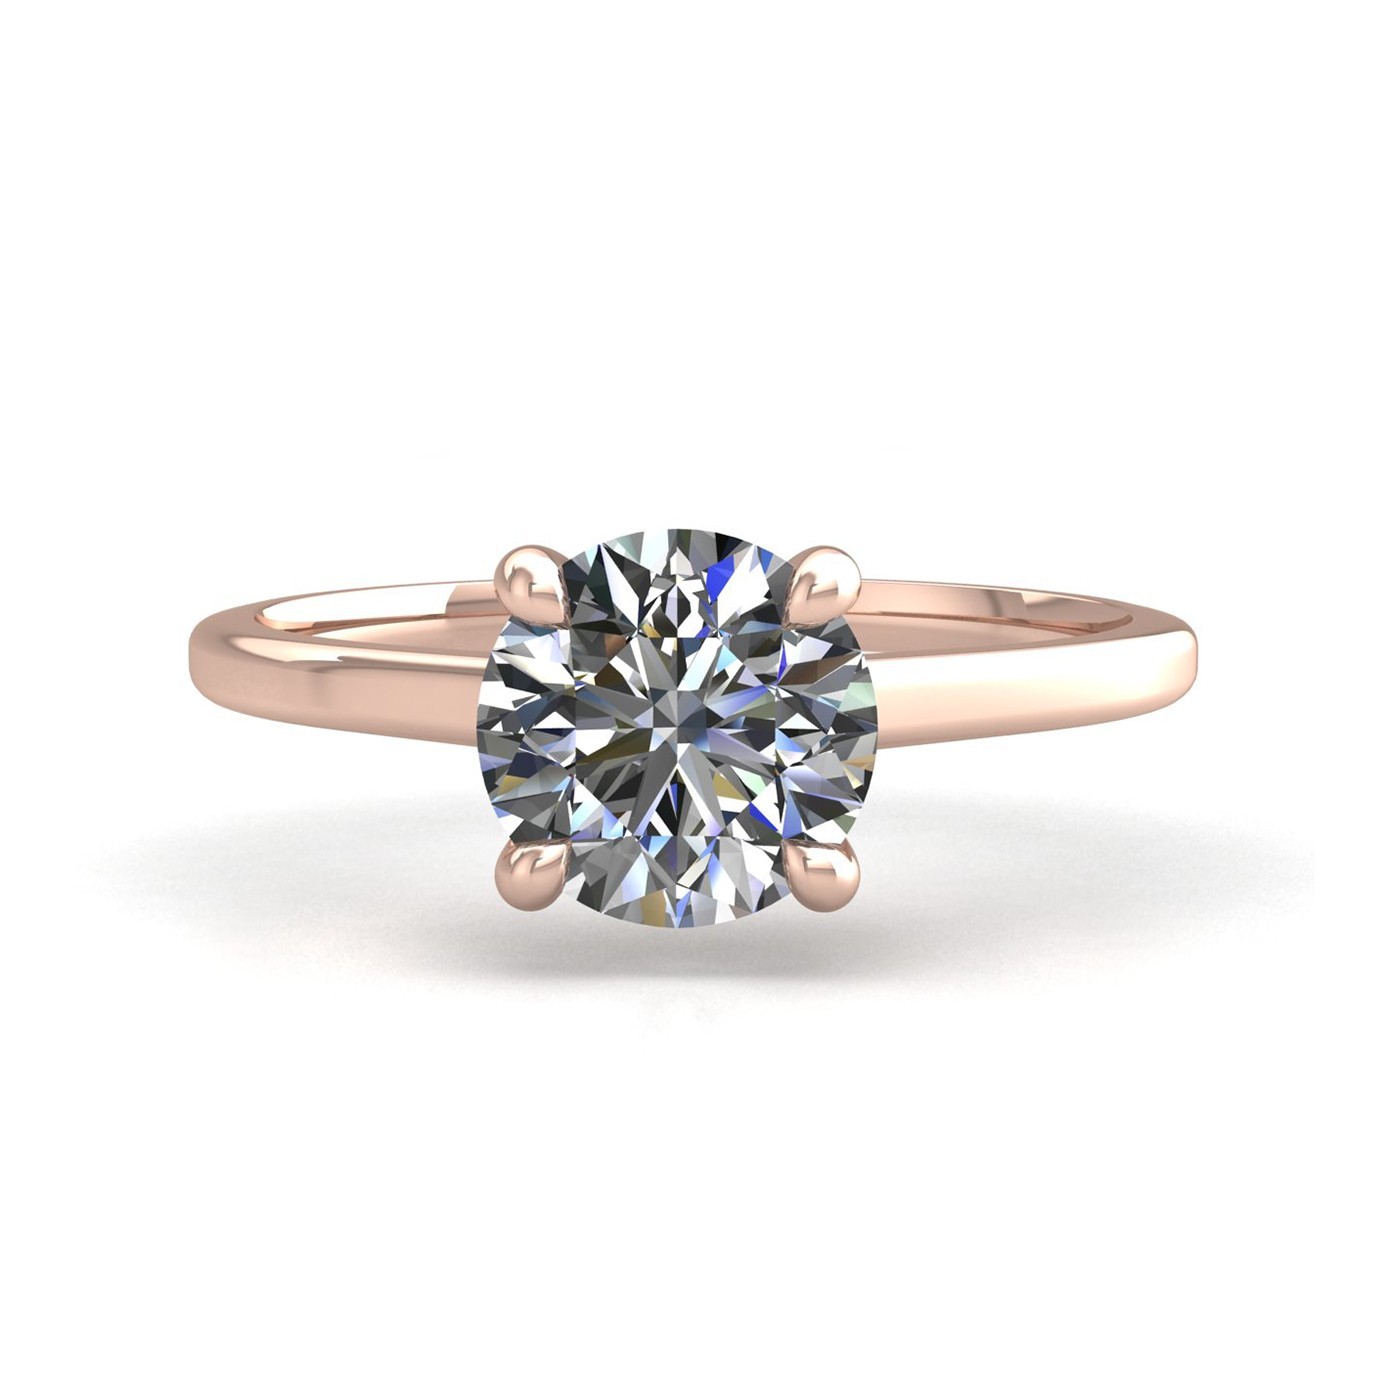 18k rose gold 2.5 ct 4 prongs solitaire round cut diamond engagement ring with whisper thin band Photos & images